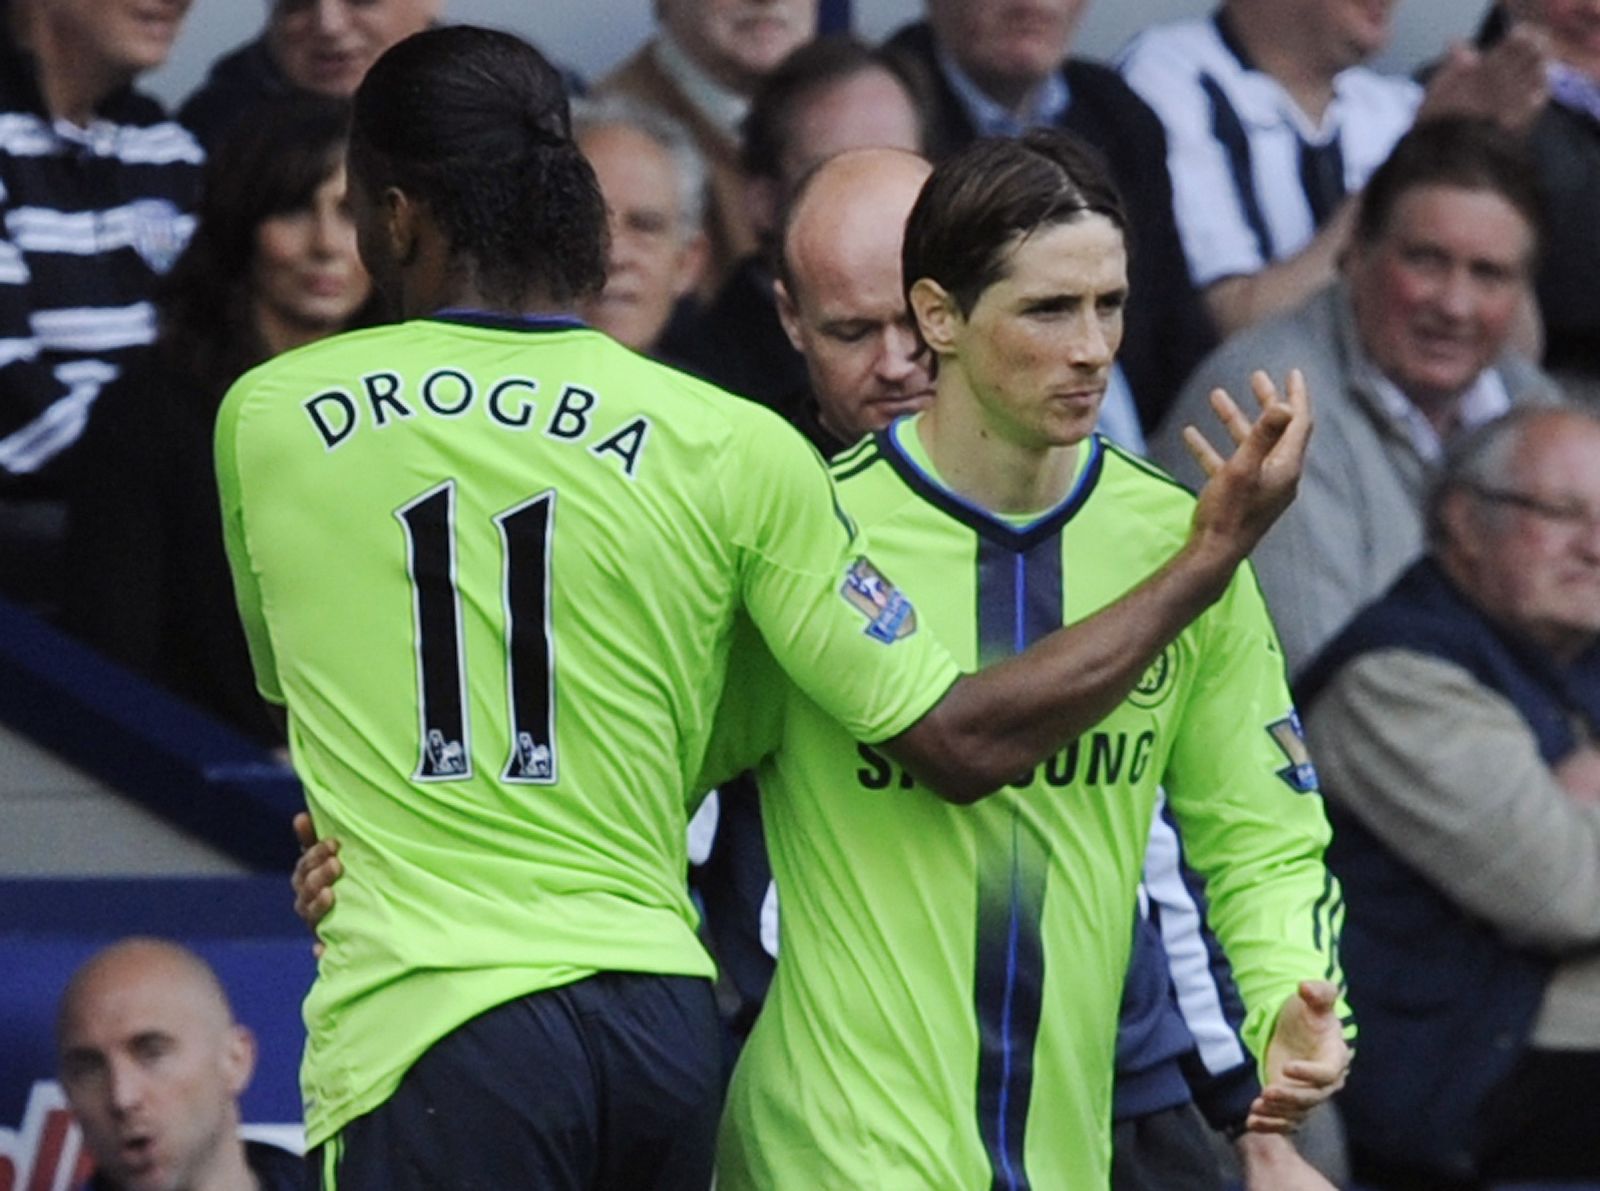 Chelsea's Drogba is substituted by Torres during their English Premier League soccer match against West Bromwich Albion in West Bromwich